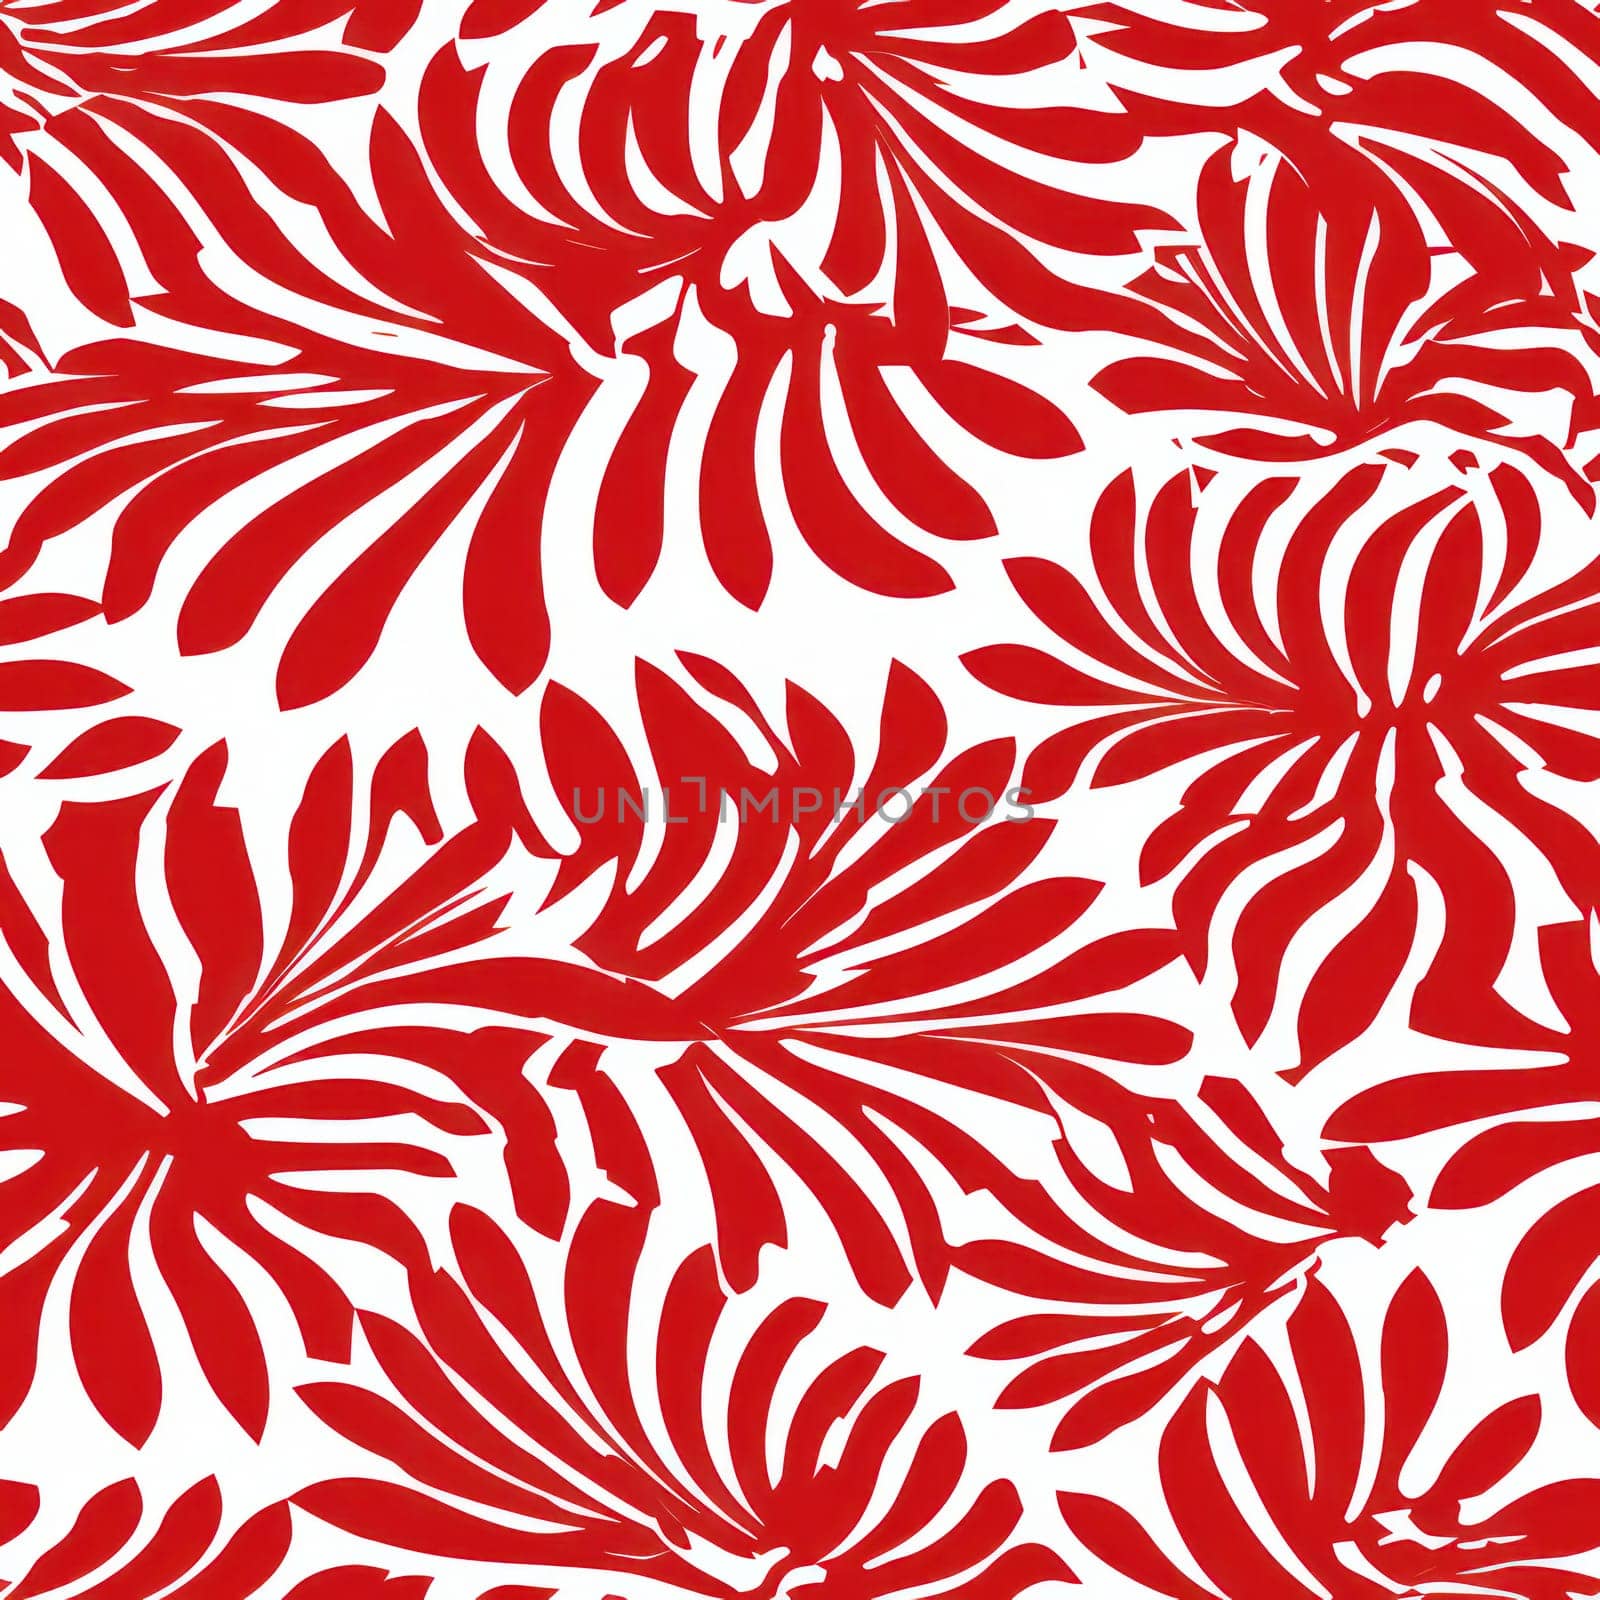 Tropic Summer Pattern: Nature's Seamless Background of Textured Design Illustration of Leaves on Fabric. by Vichizh